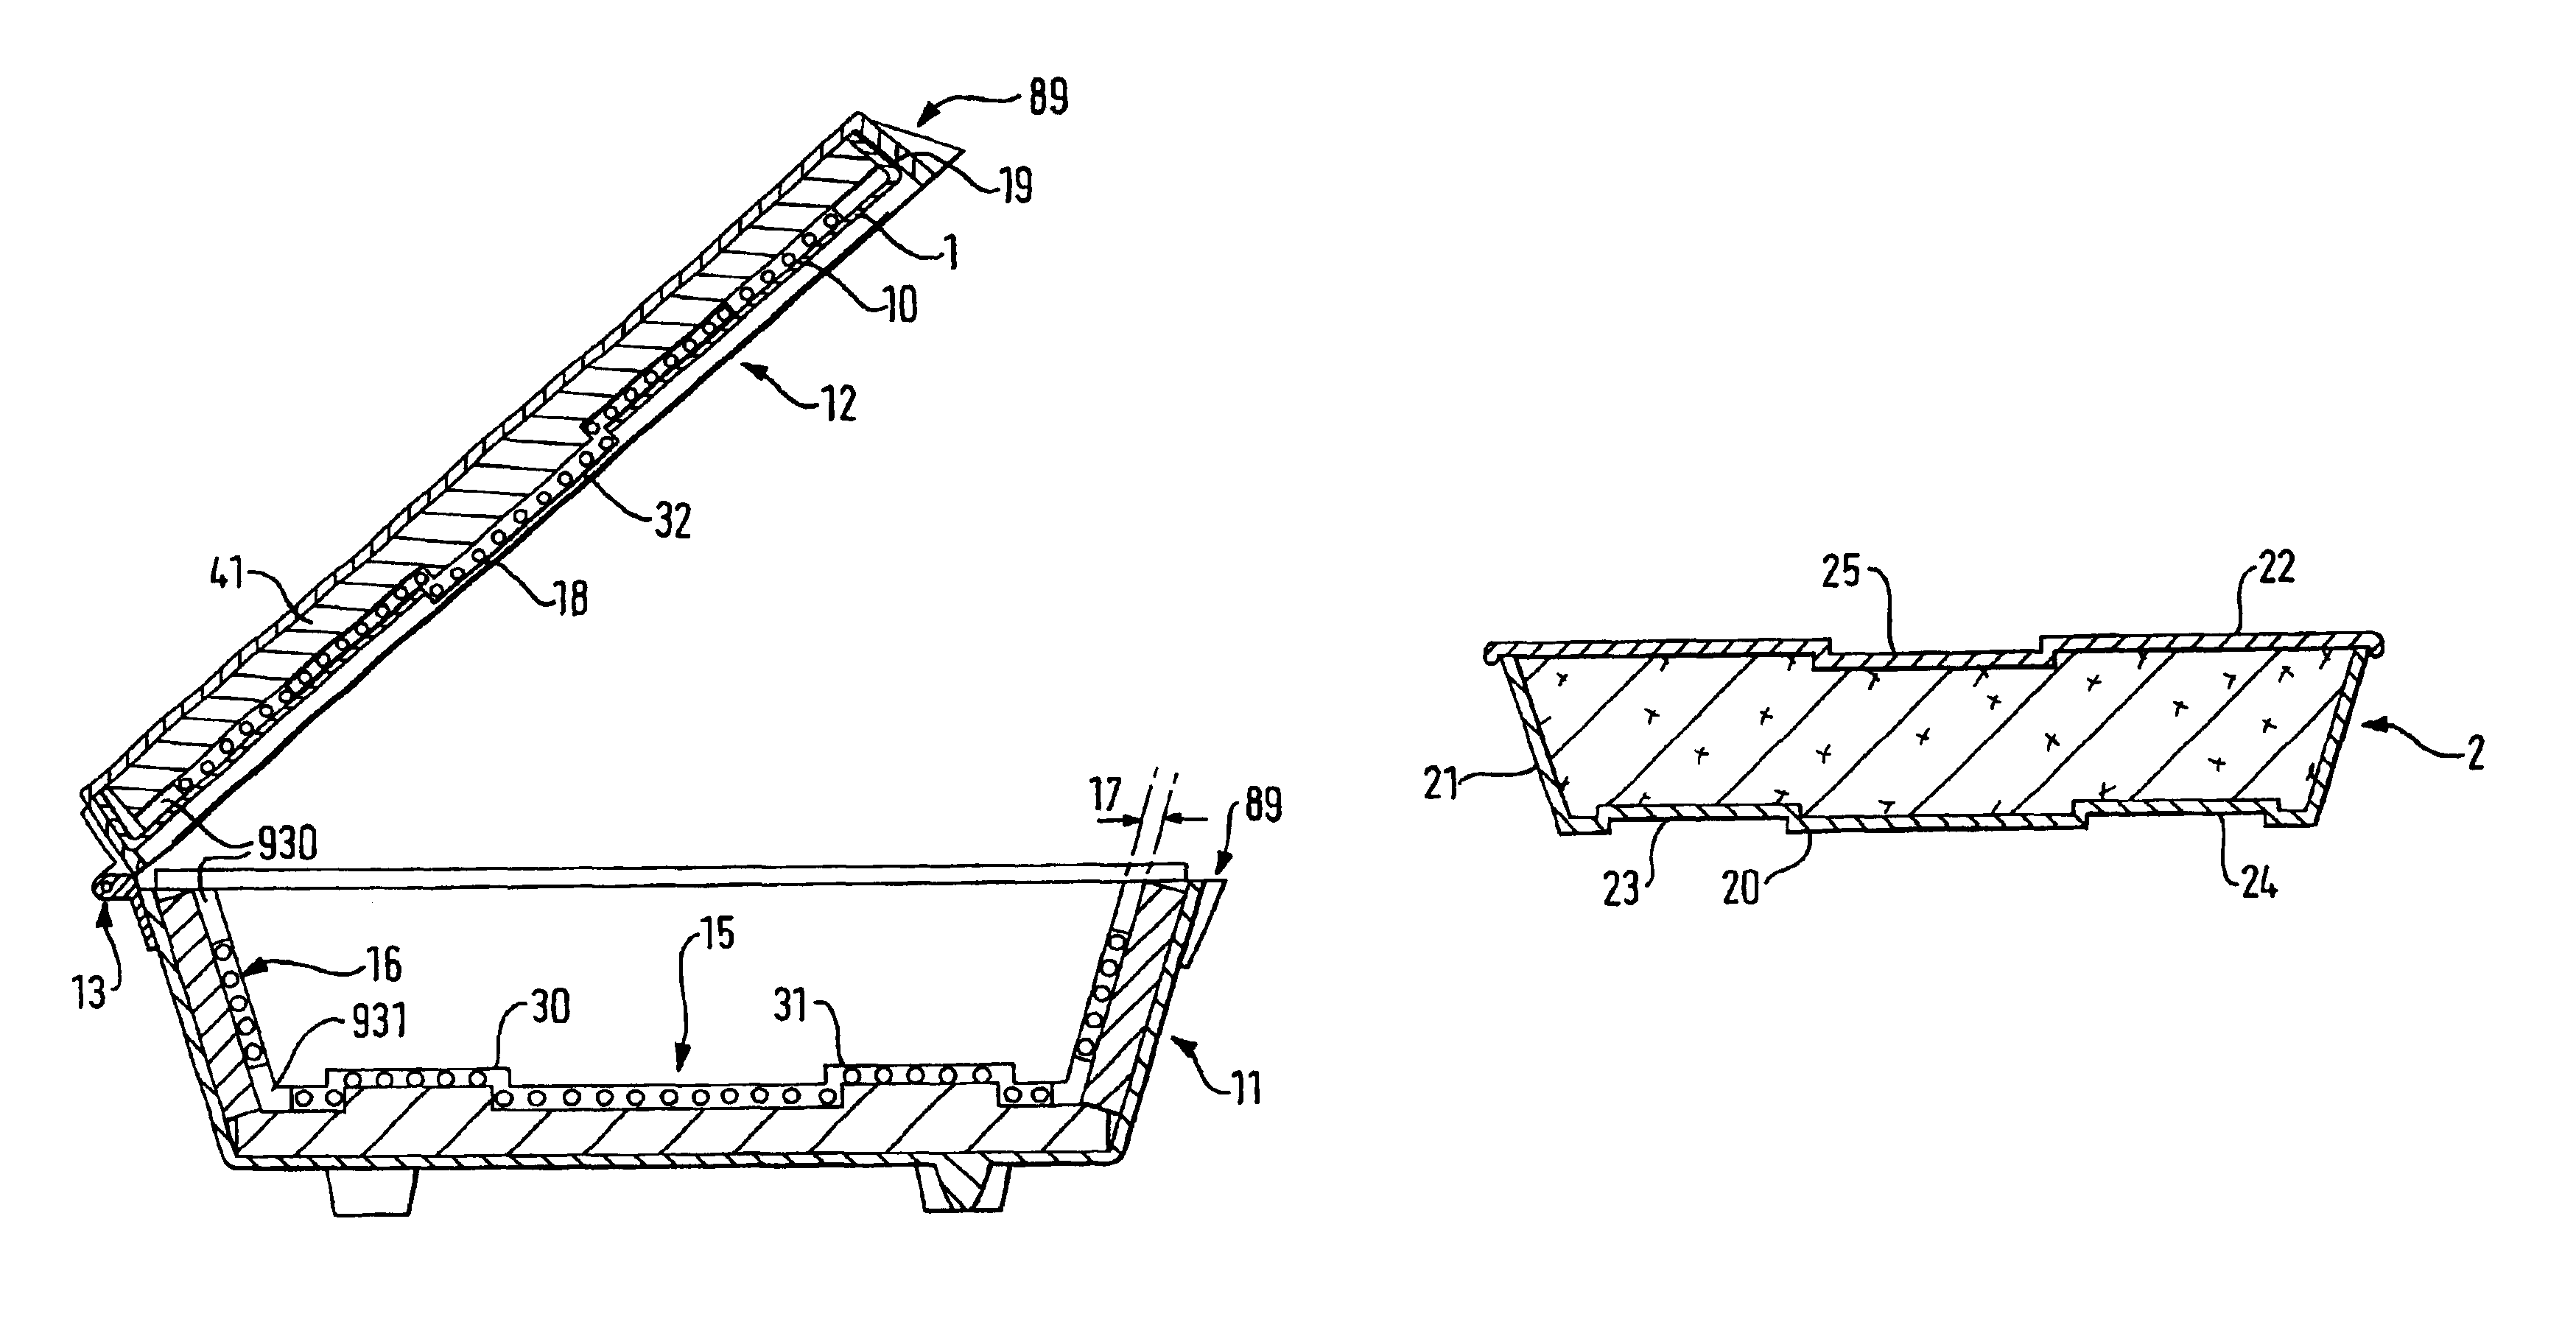 Apparatus and method of rapidly and evenly heating a packaged food product